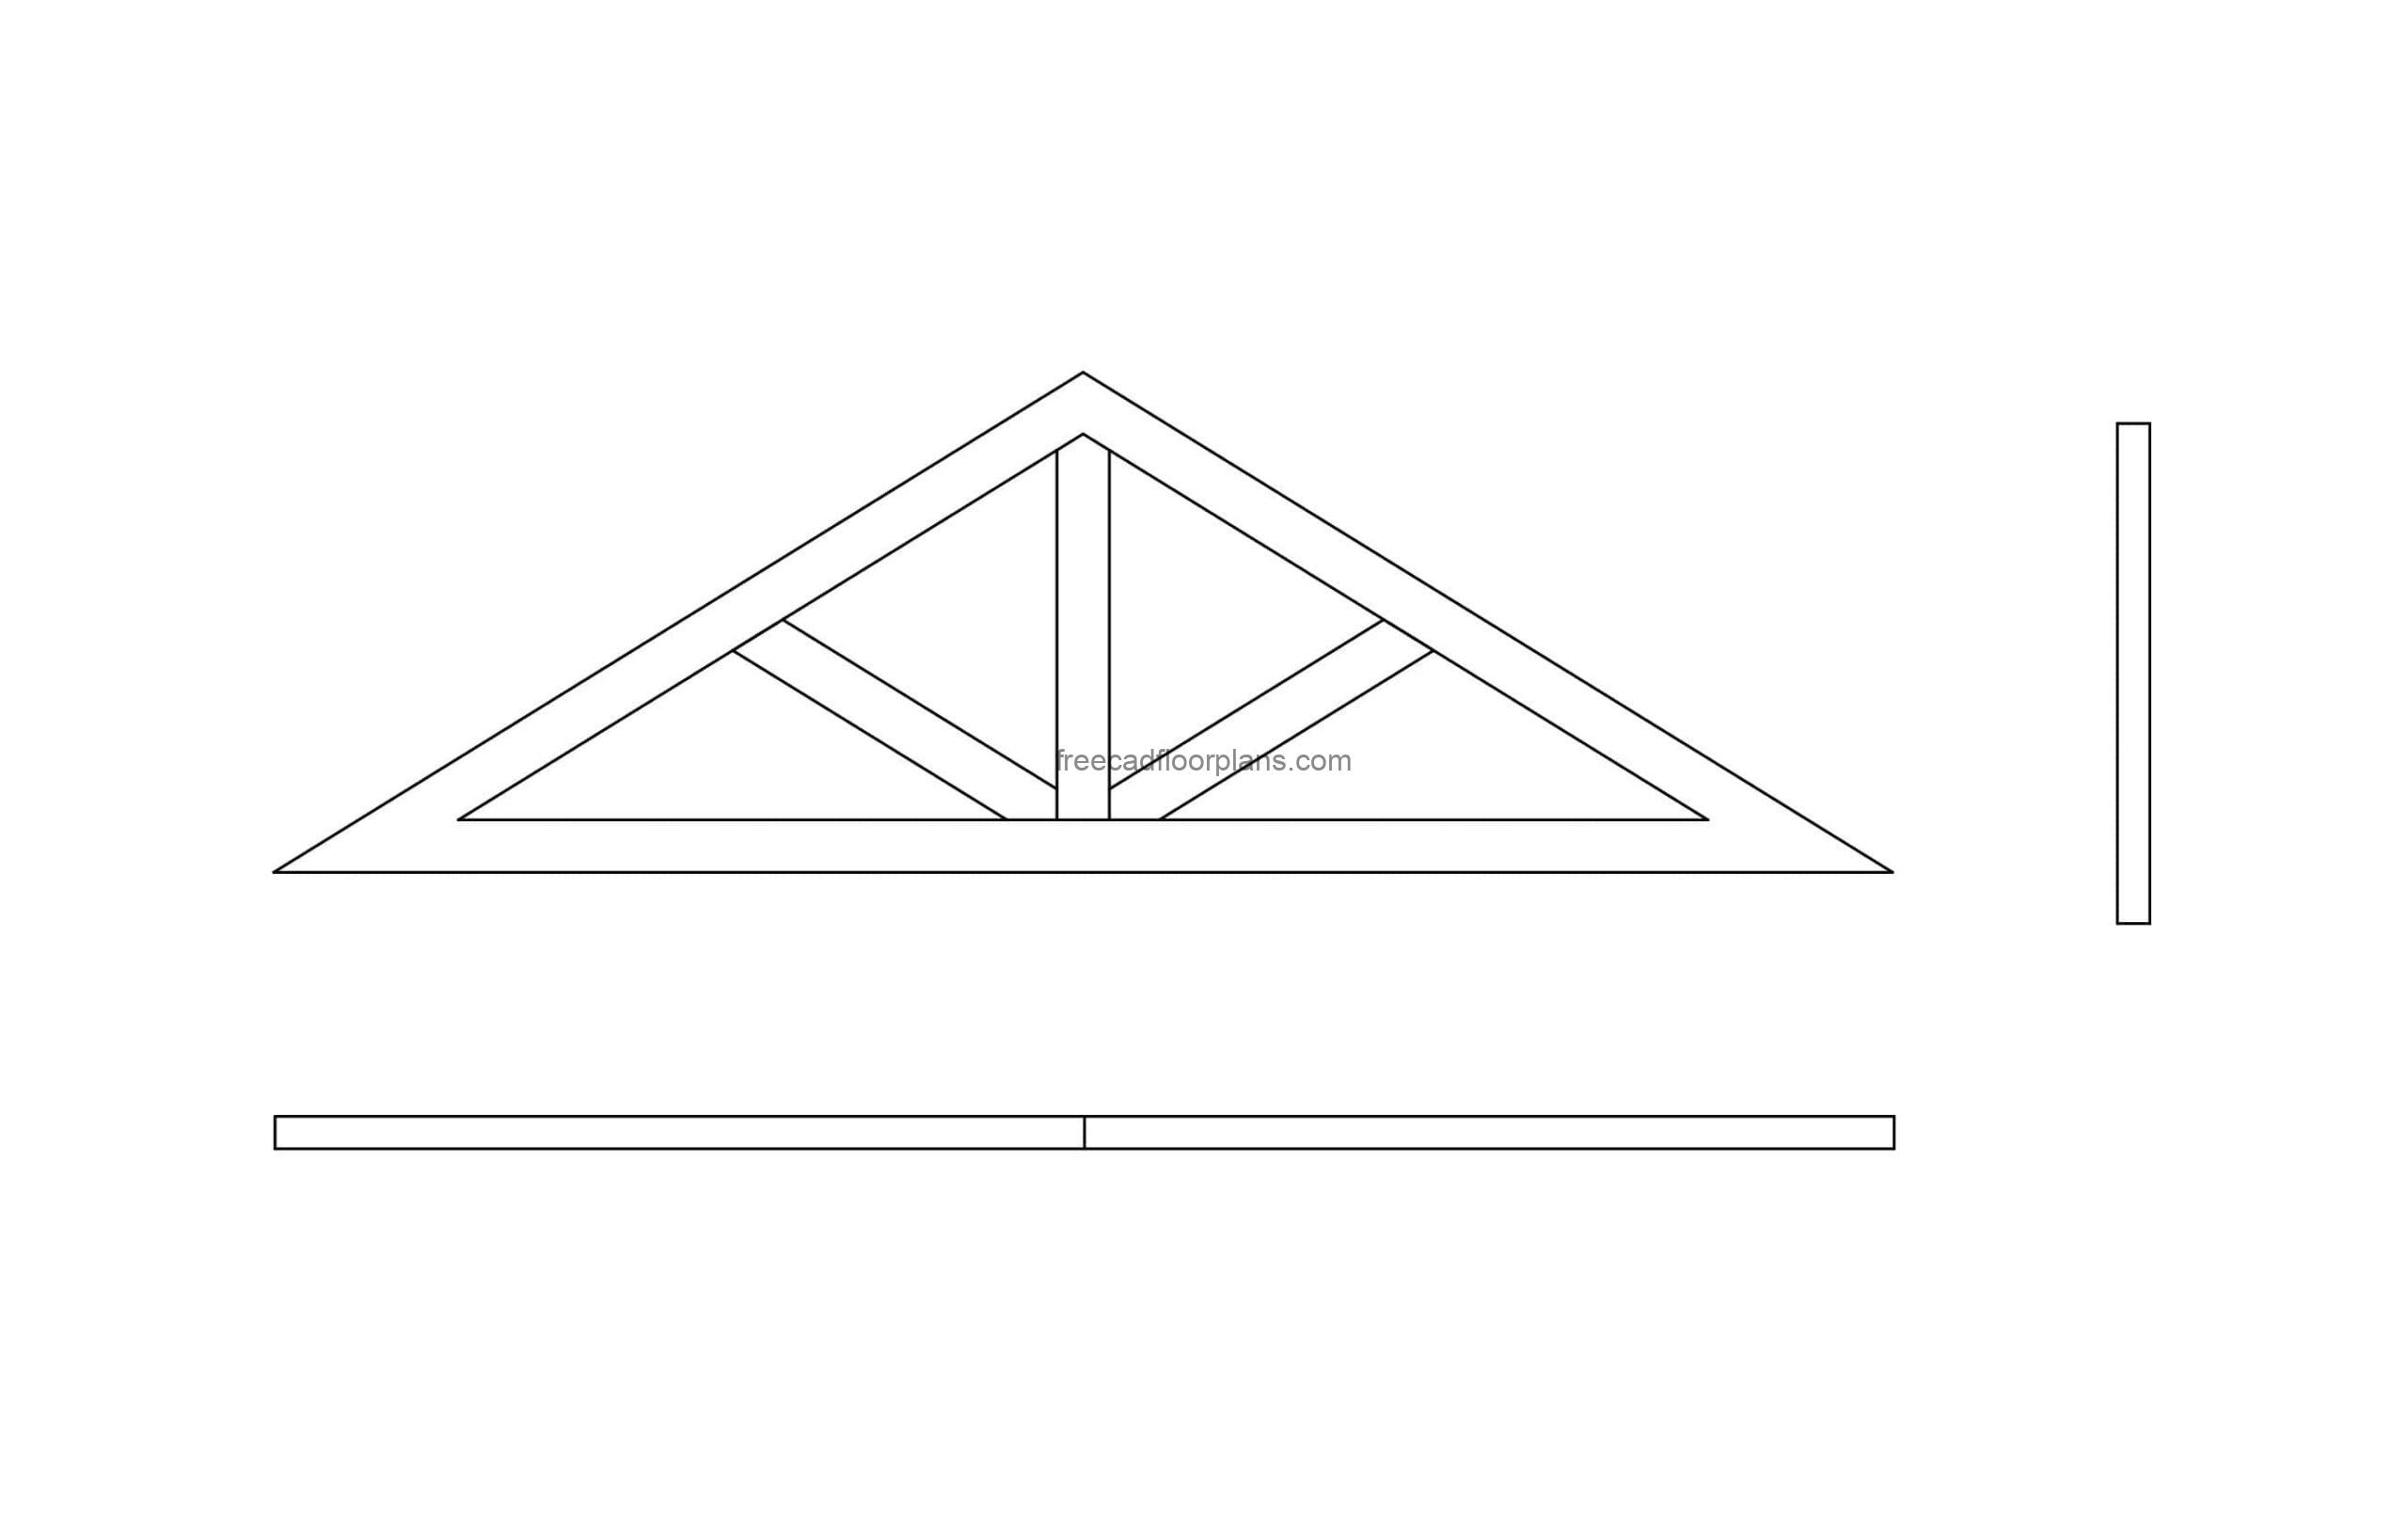 truss king post autocad drawing cad block plan and elevations views dwg file for free download